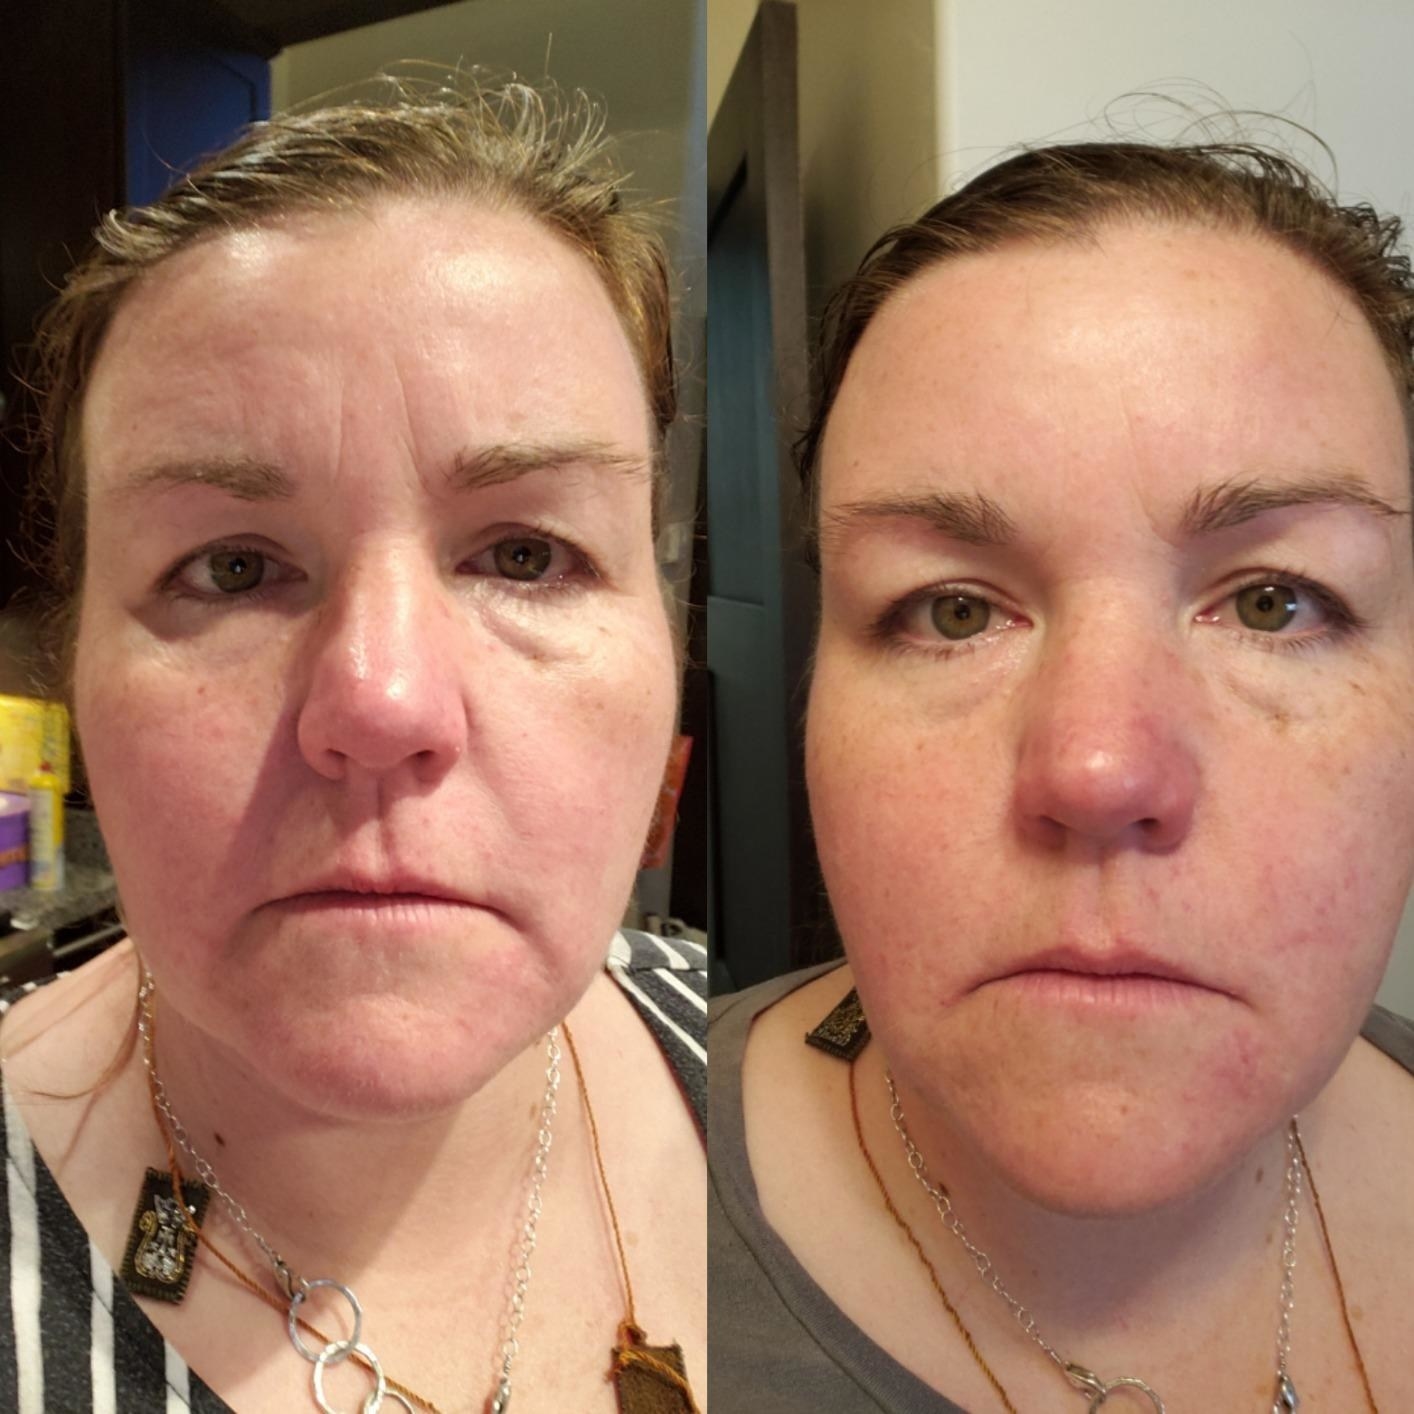 before and after showing the cream reduced the reviewer's wrinkles and made their face look plumper